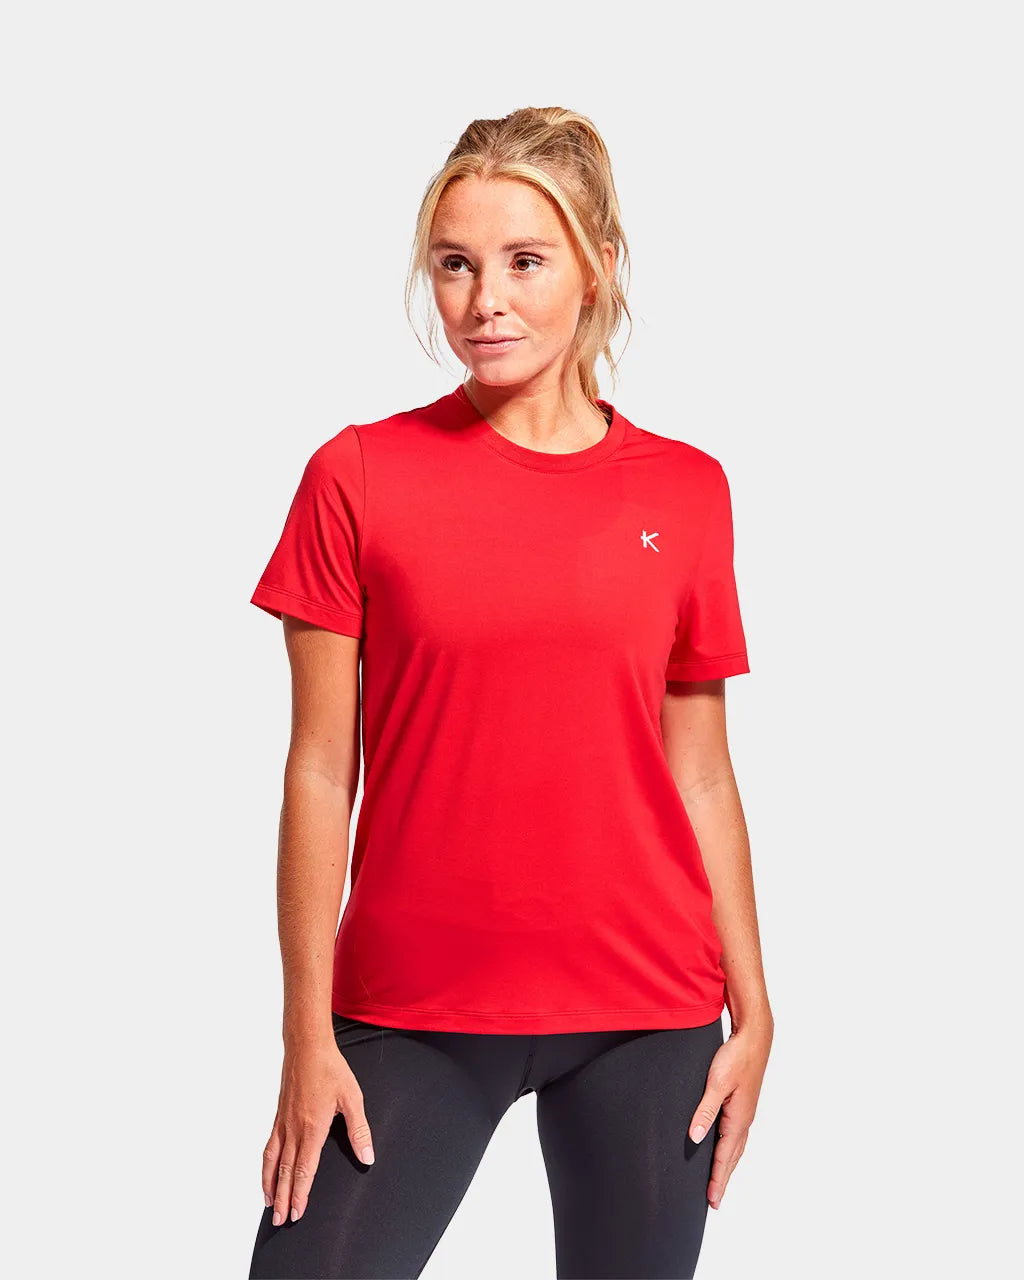 KYMIRA RECHARGE Infrared Women's Recovery T-Shirt - Red